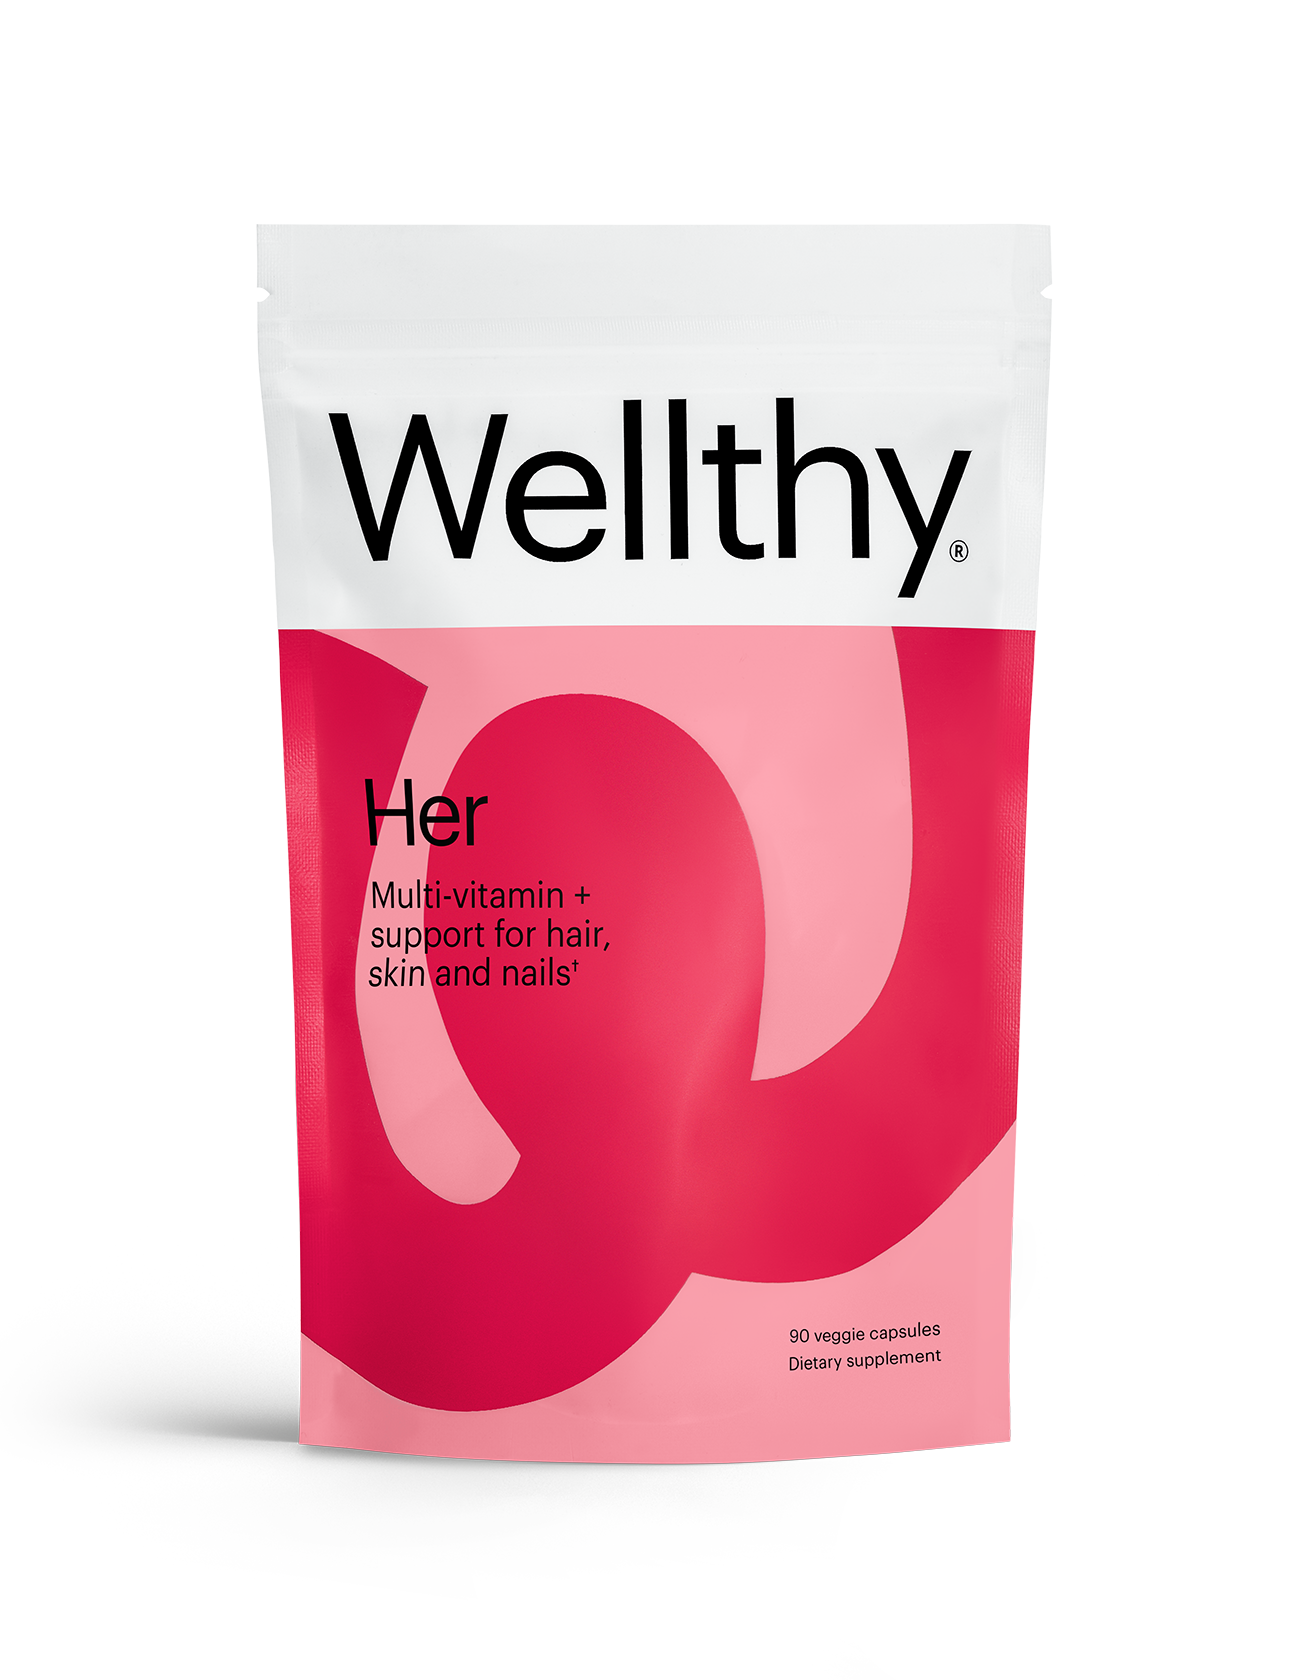 HER: Women’s multivitamin plus hair, skin & nail support Supplements Wellthy Nutraceuticals 